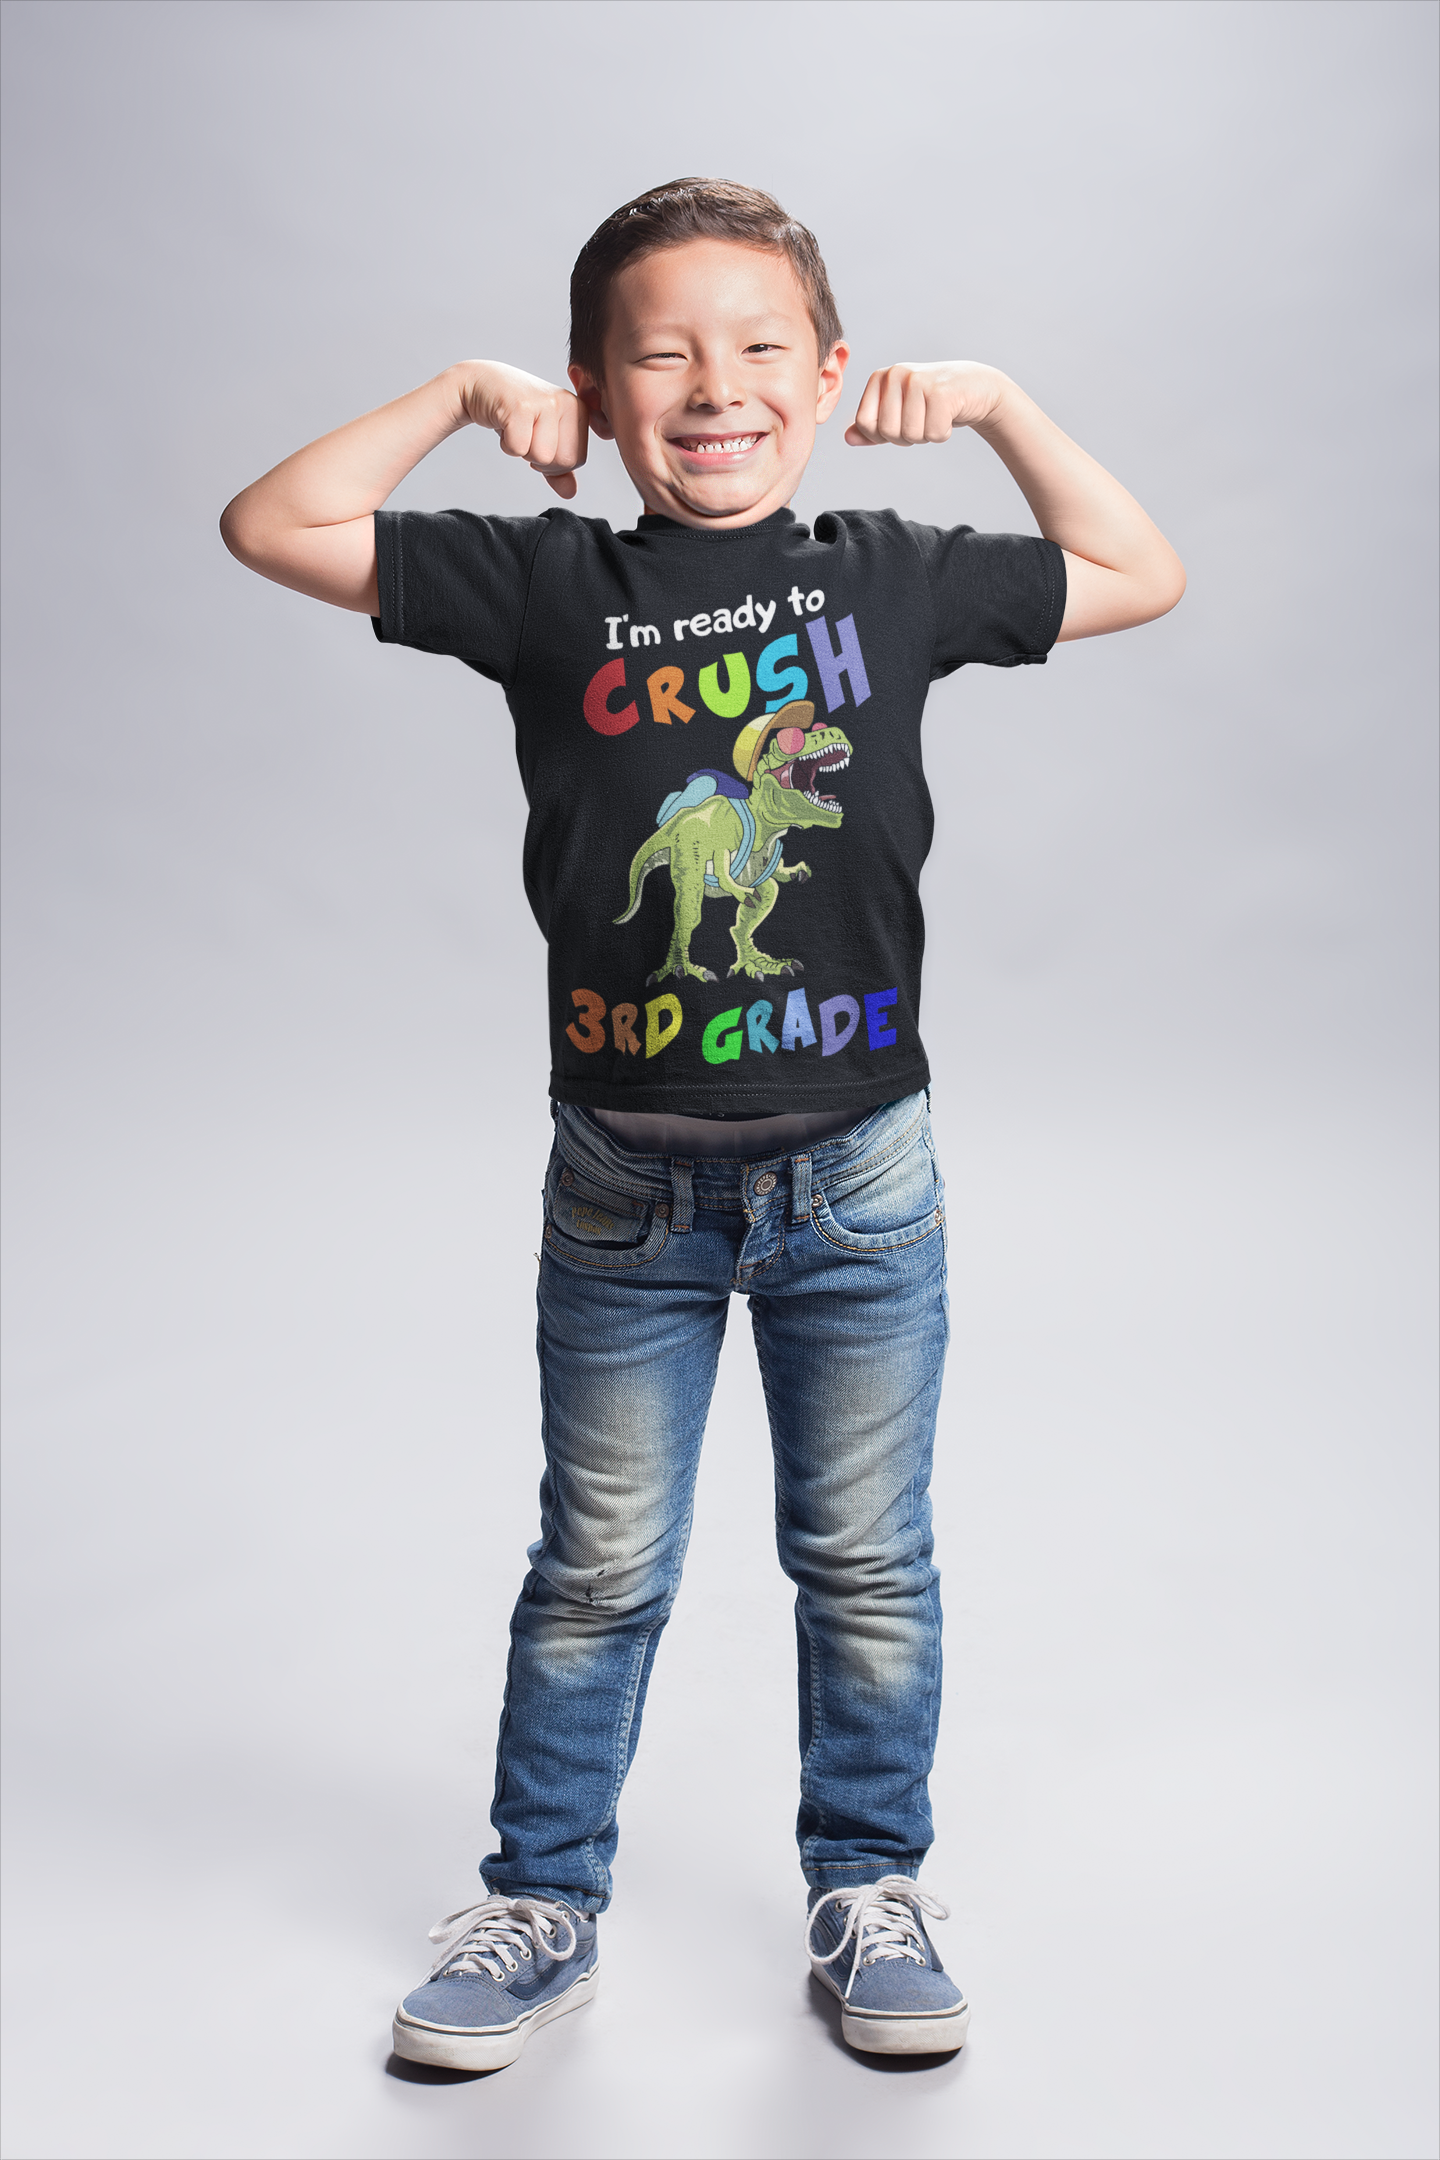 I'm Ready to crush 3rd grade School Dinosaur backpack png Digital Download Instand Download